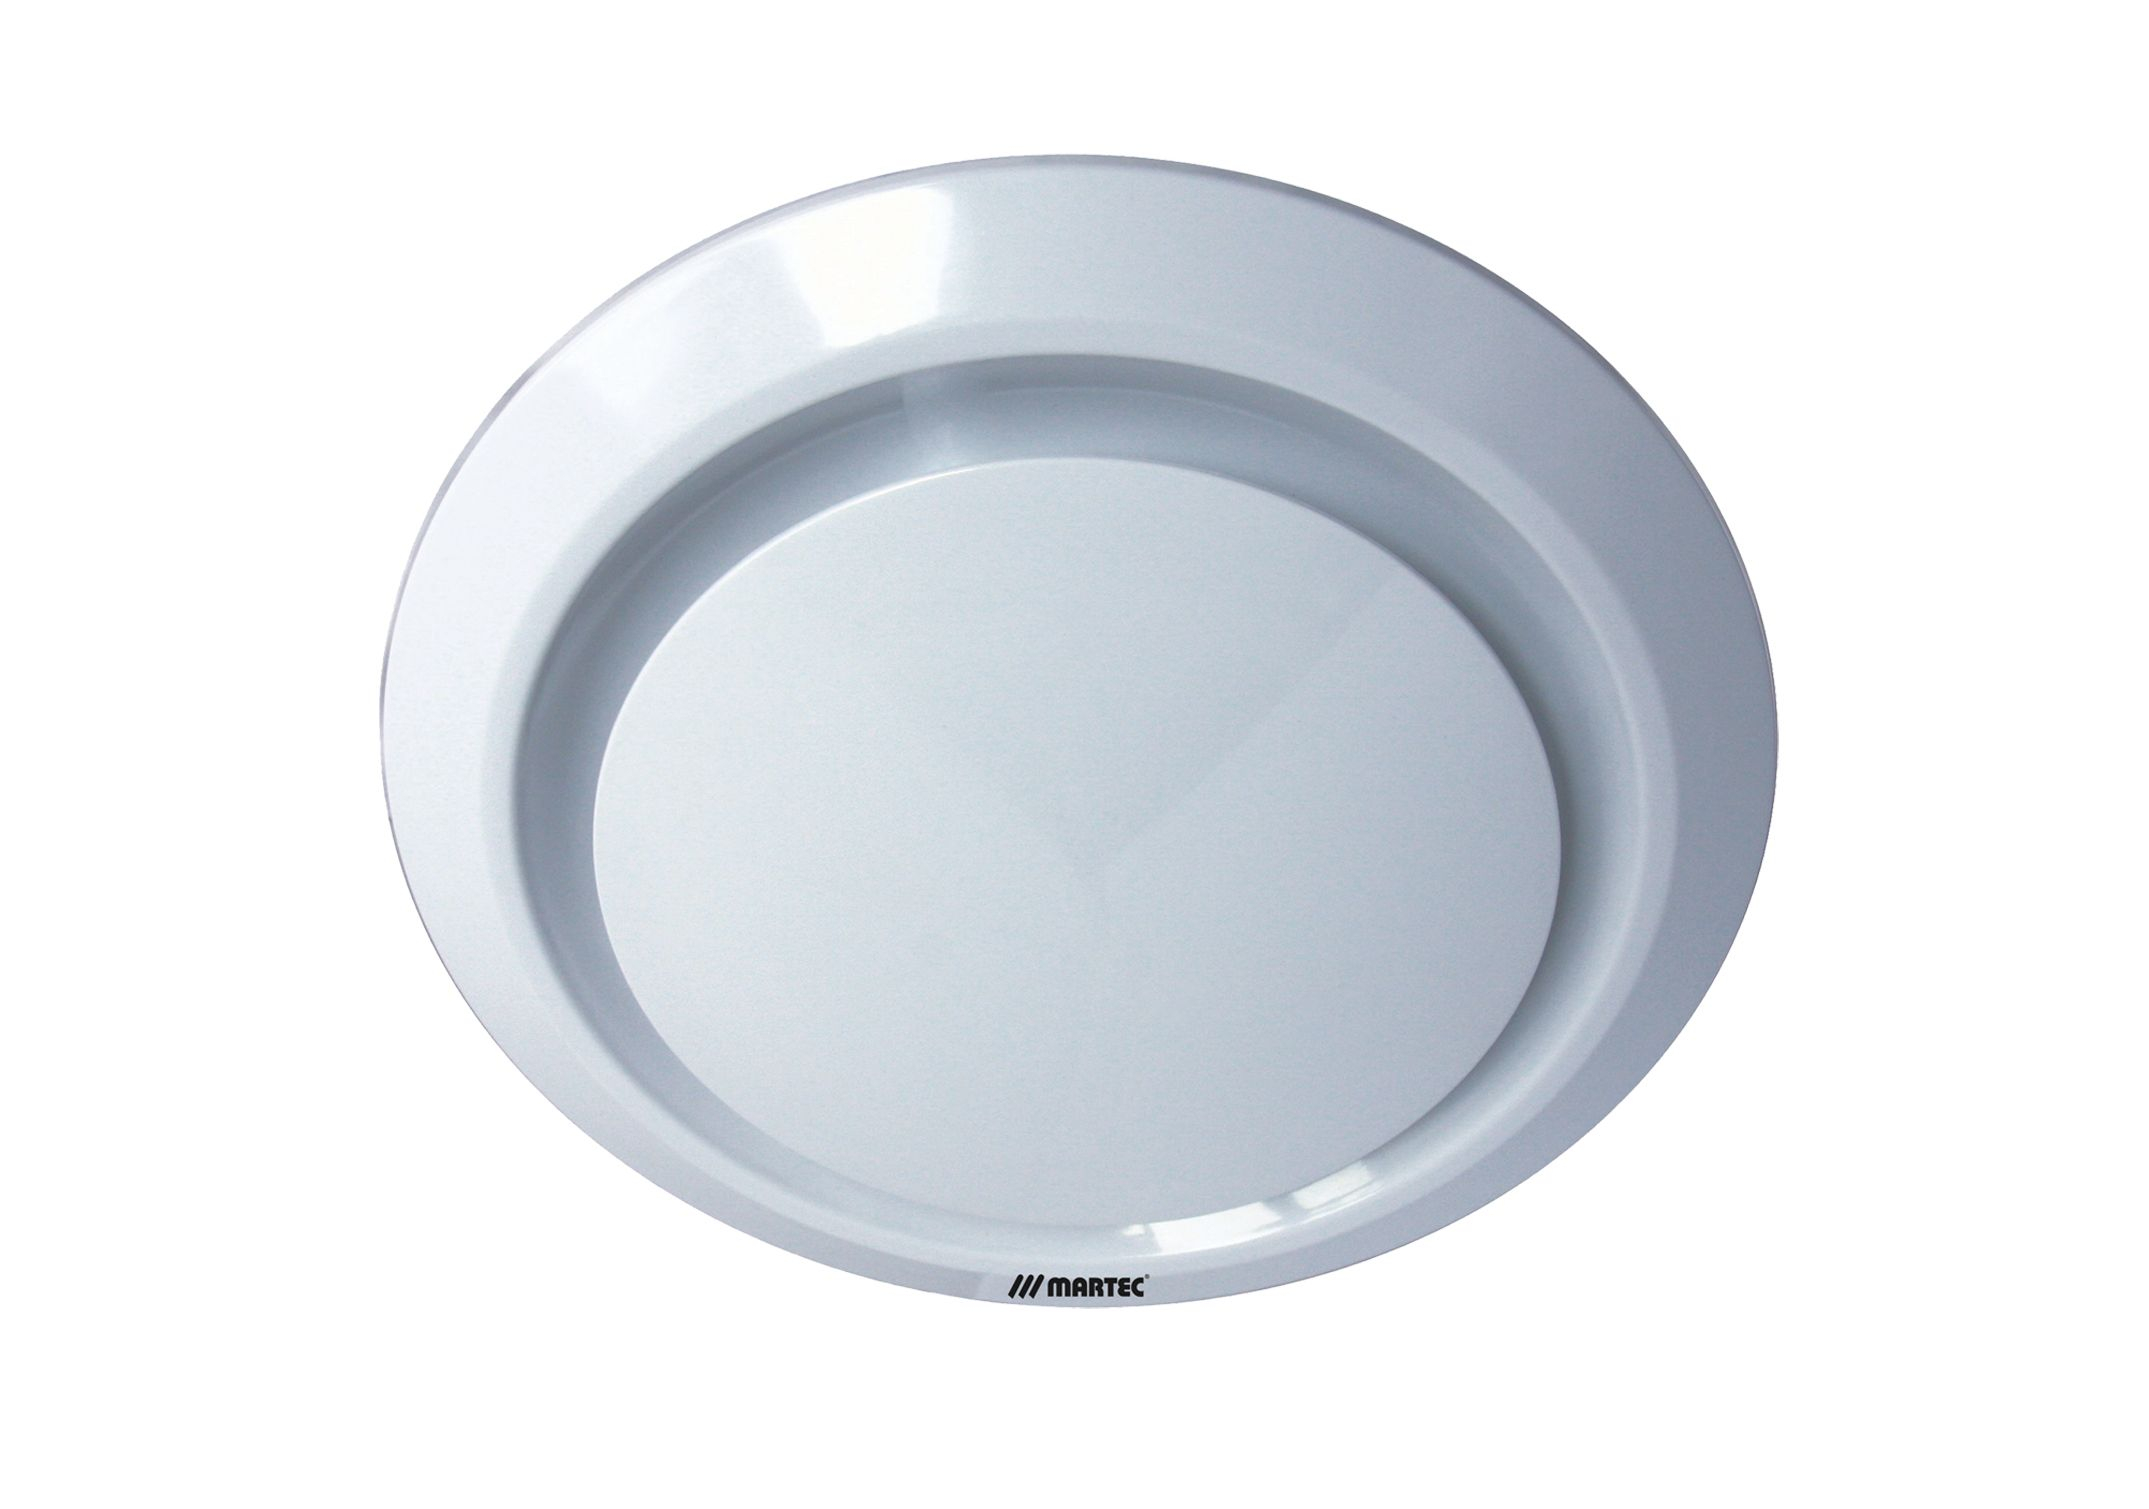 The Martec Gyro No Light In White Or Silver Is A Modern intended for sizing 2149 X 1509